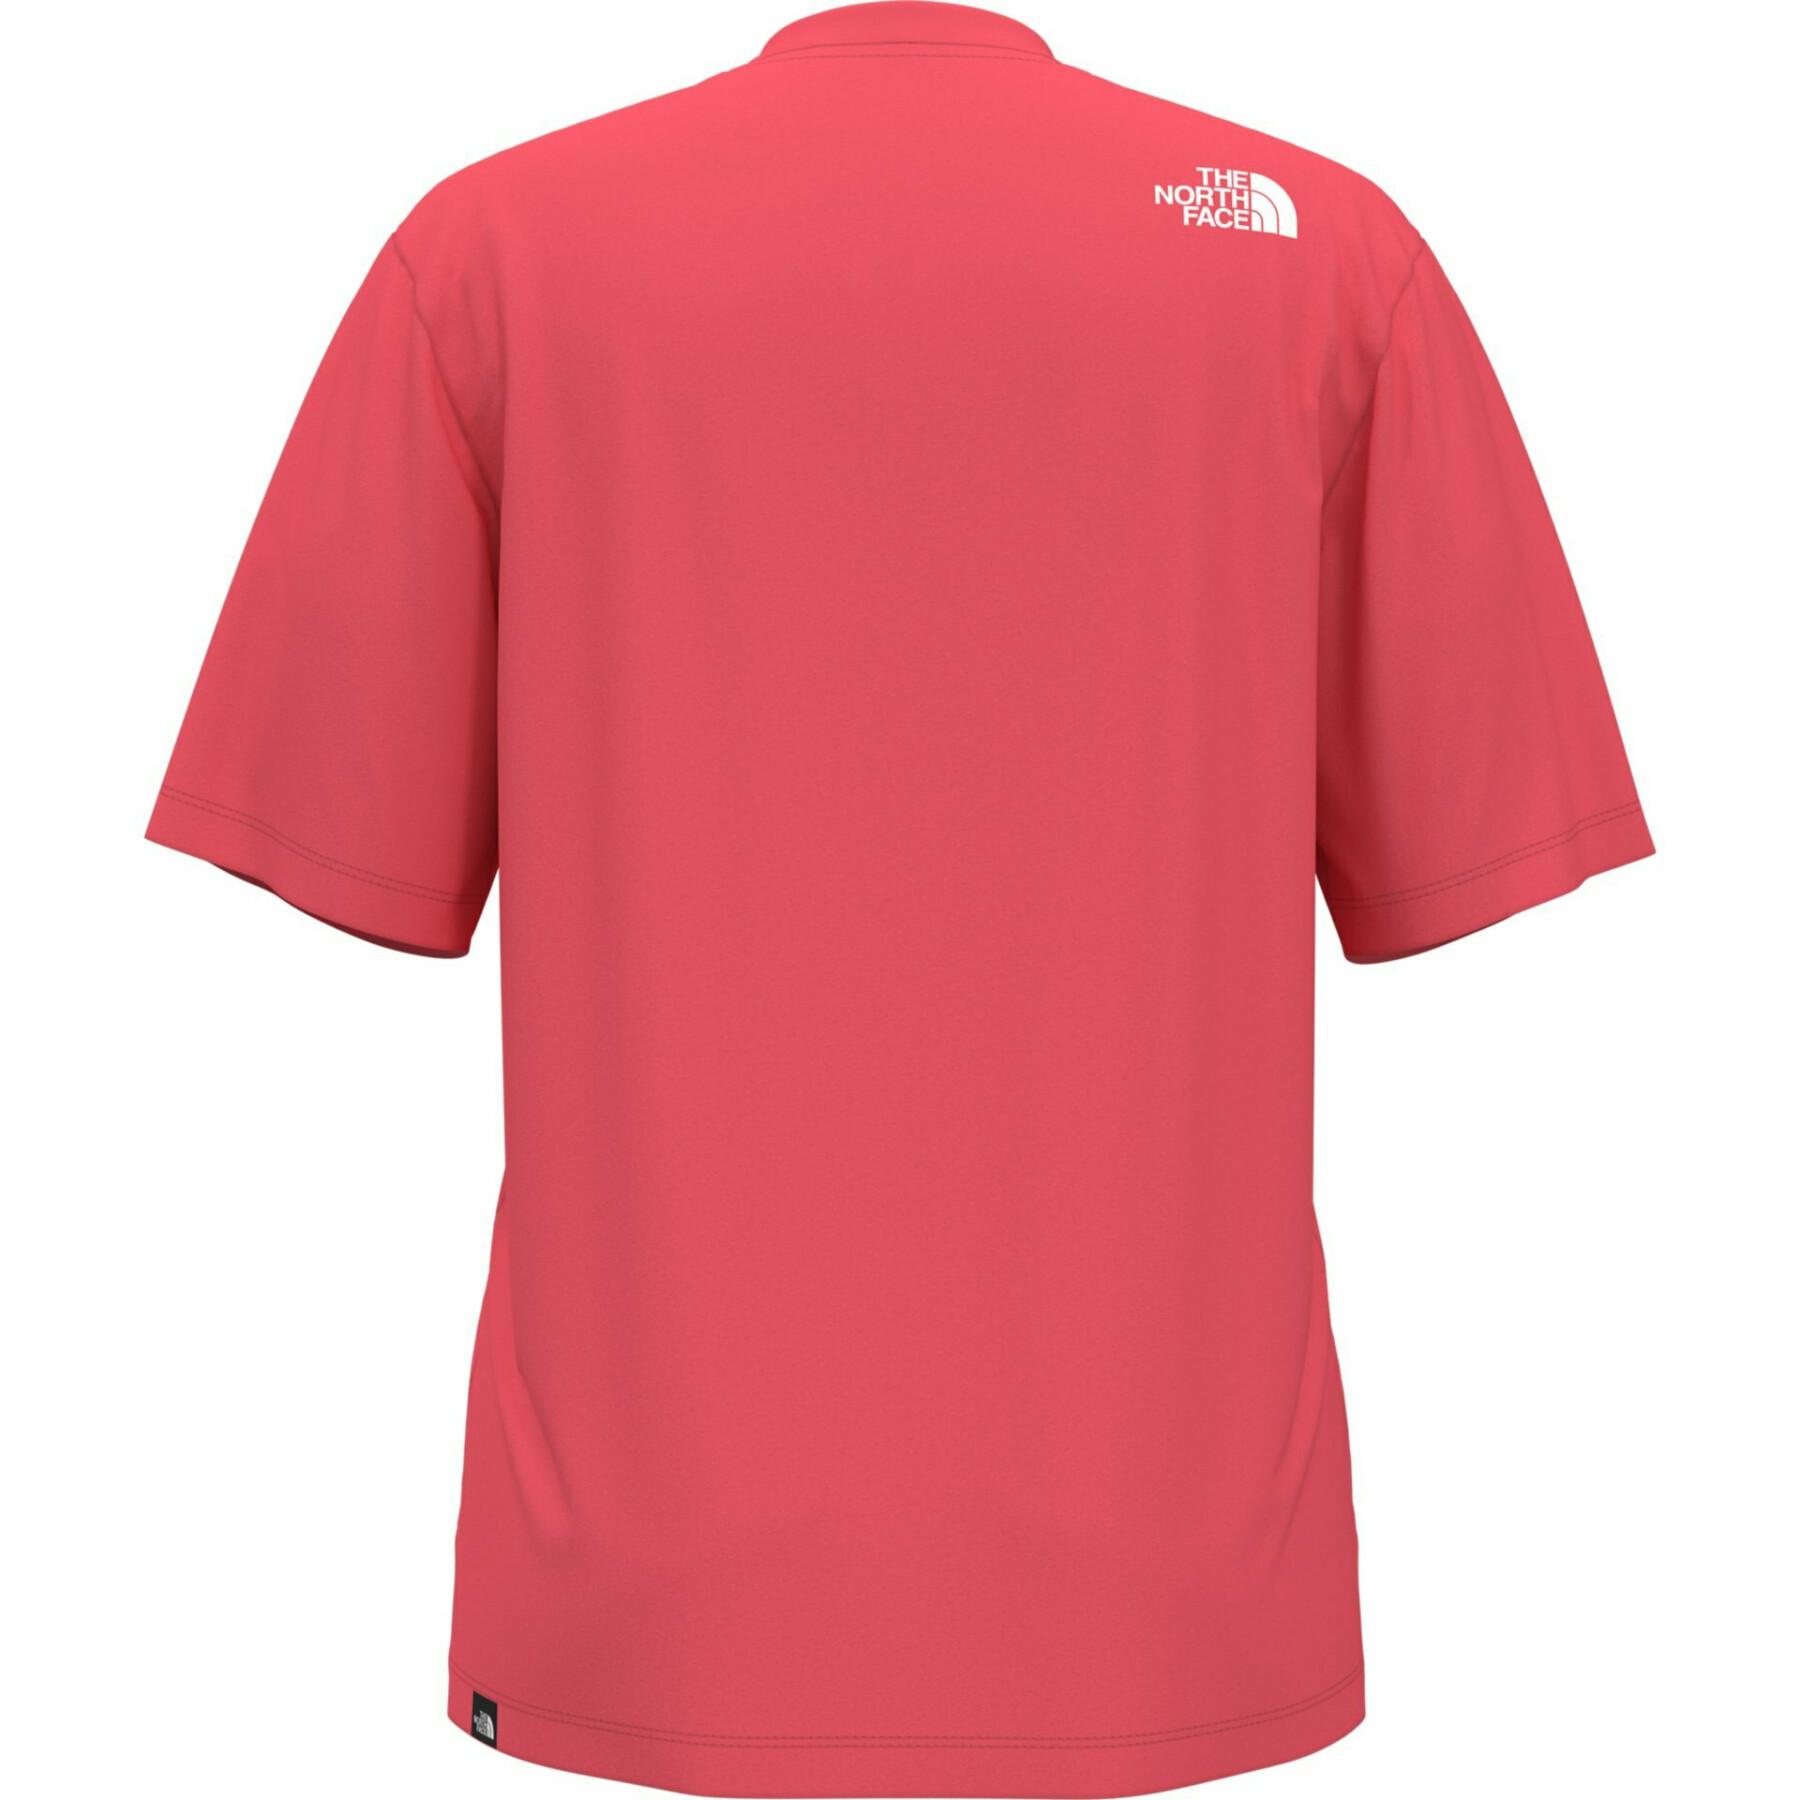 T-shirt donna The North Face Simple Dome